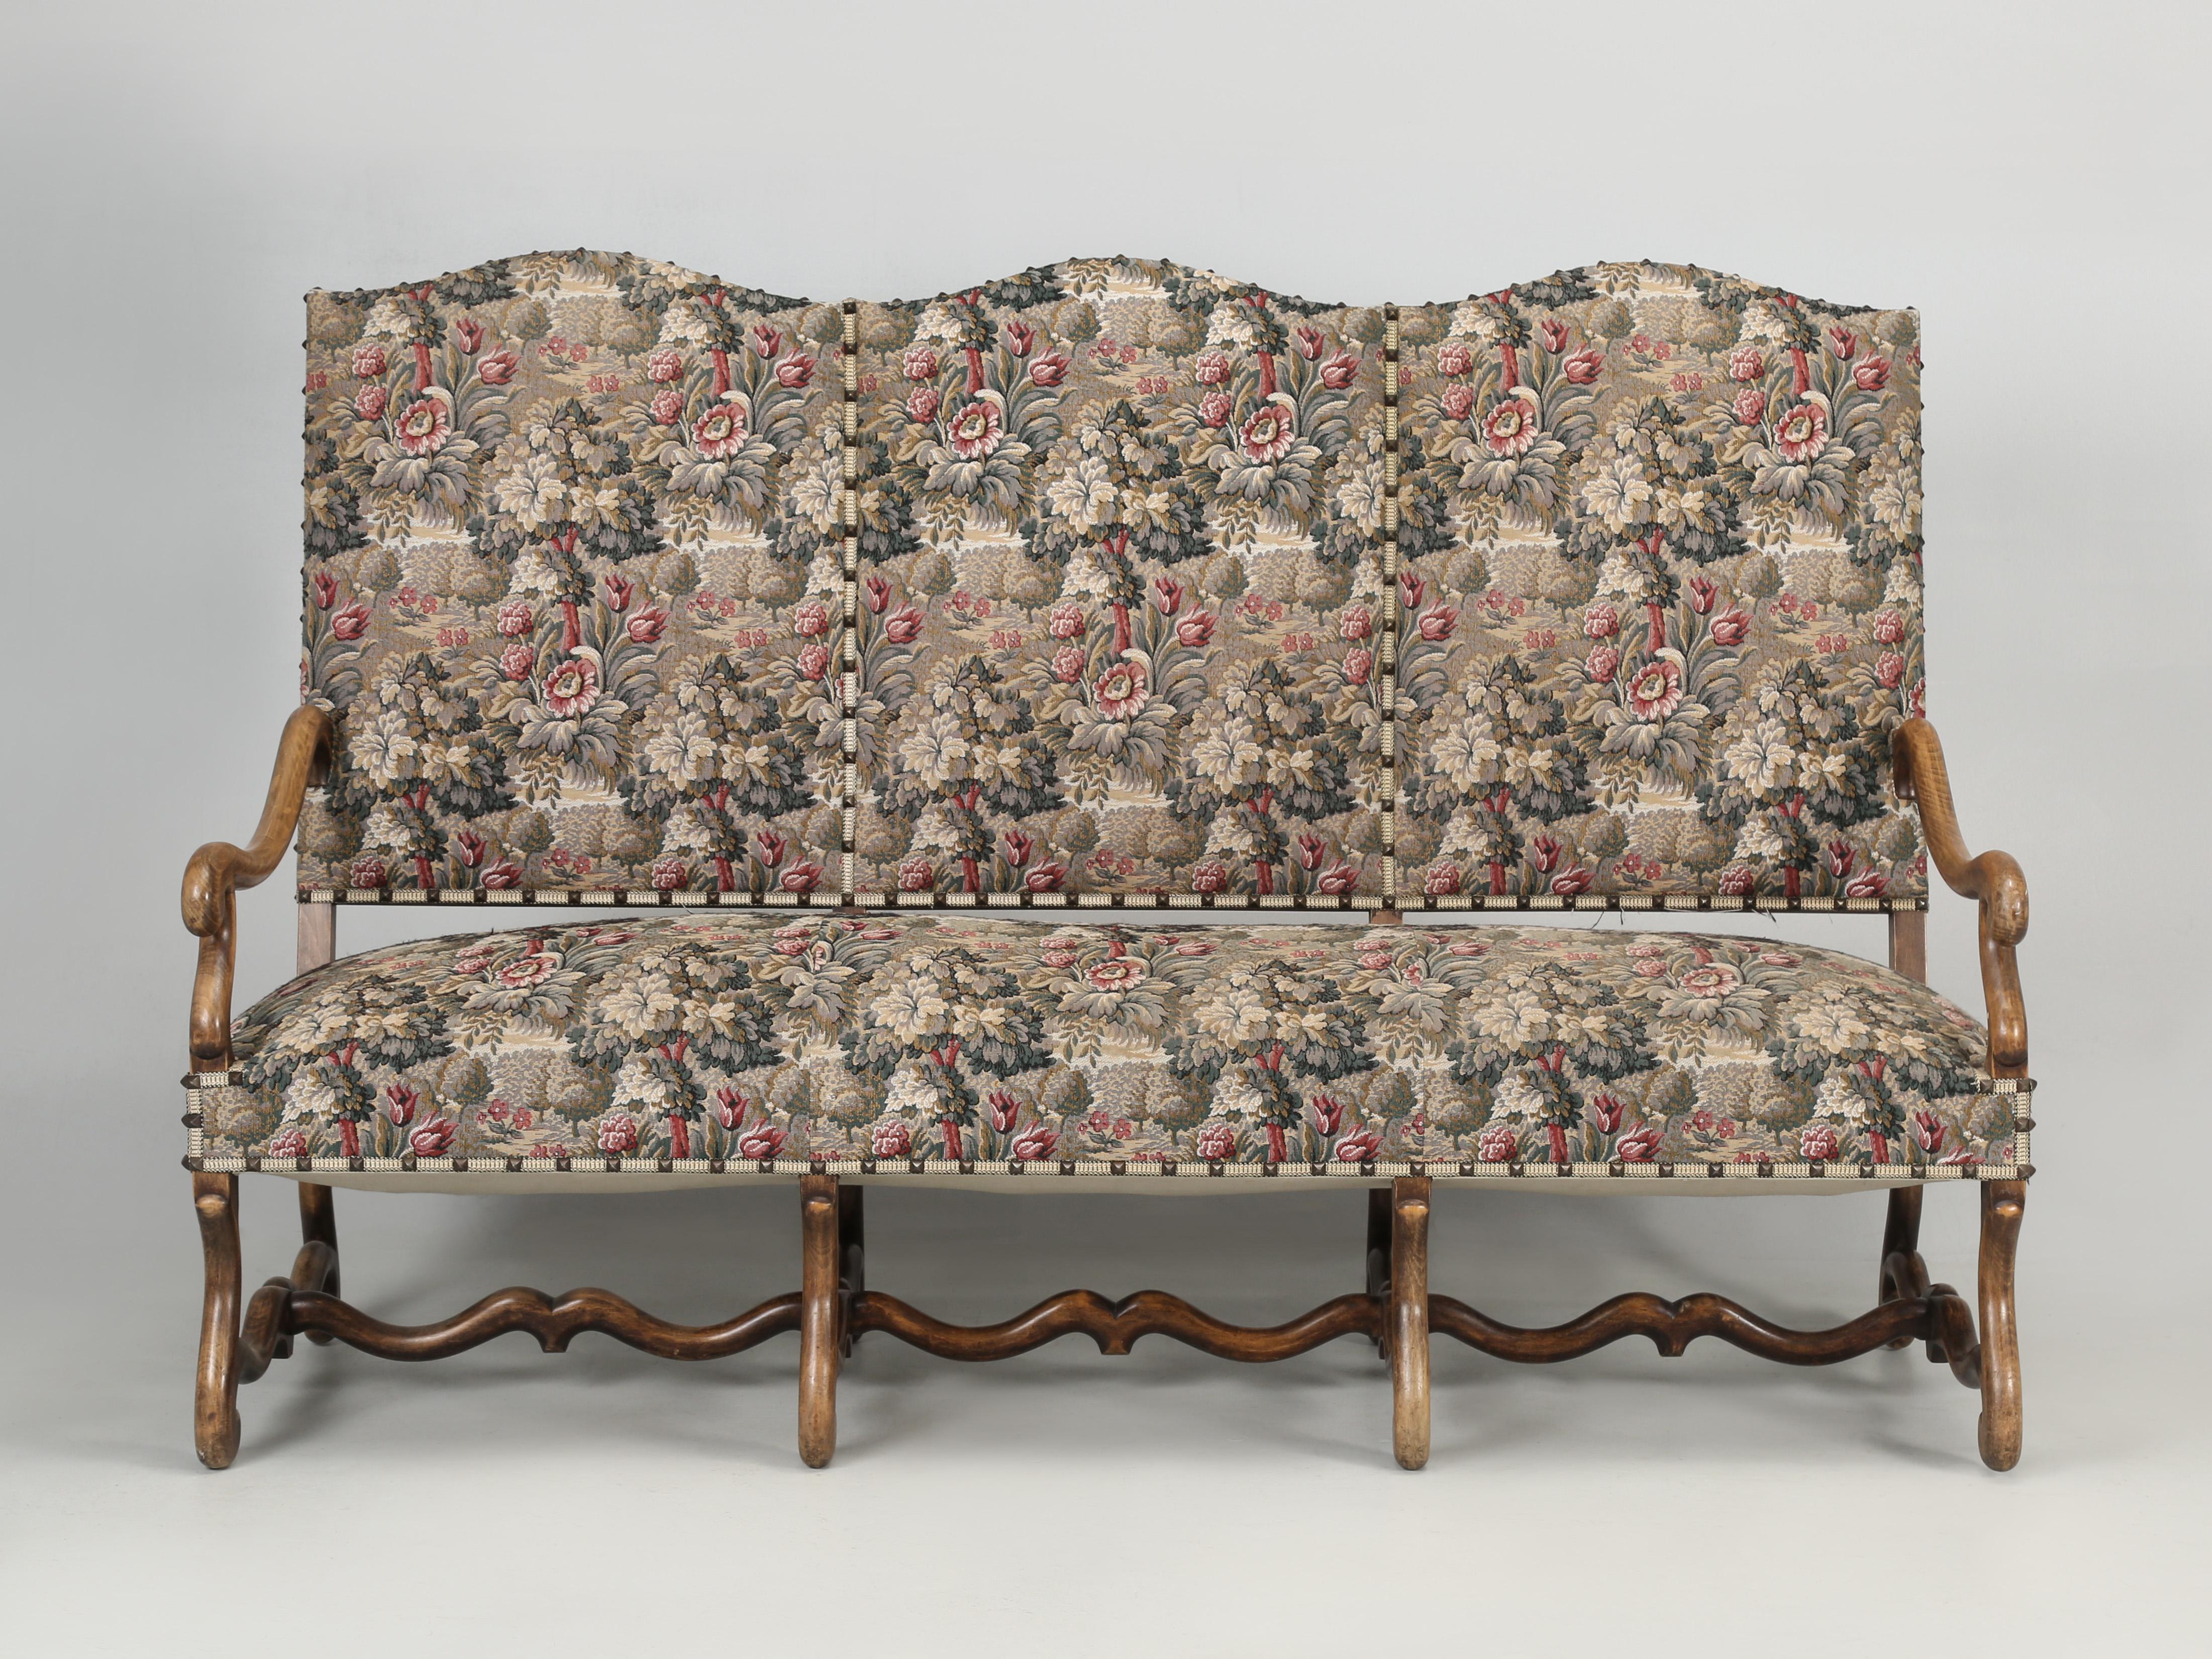 Vintage French Os de Mouton (French for sheep's bone) referring to the shape of the lower frame of this settee. The style of Os de mouton has been popular since the time of Louis XIV and are still being made today throughout the world. This vintage